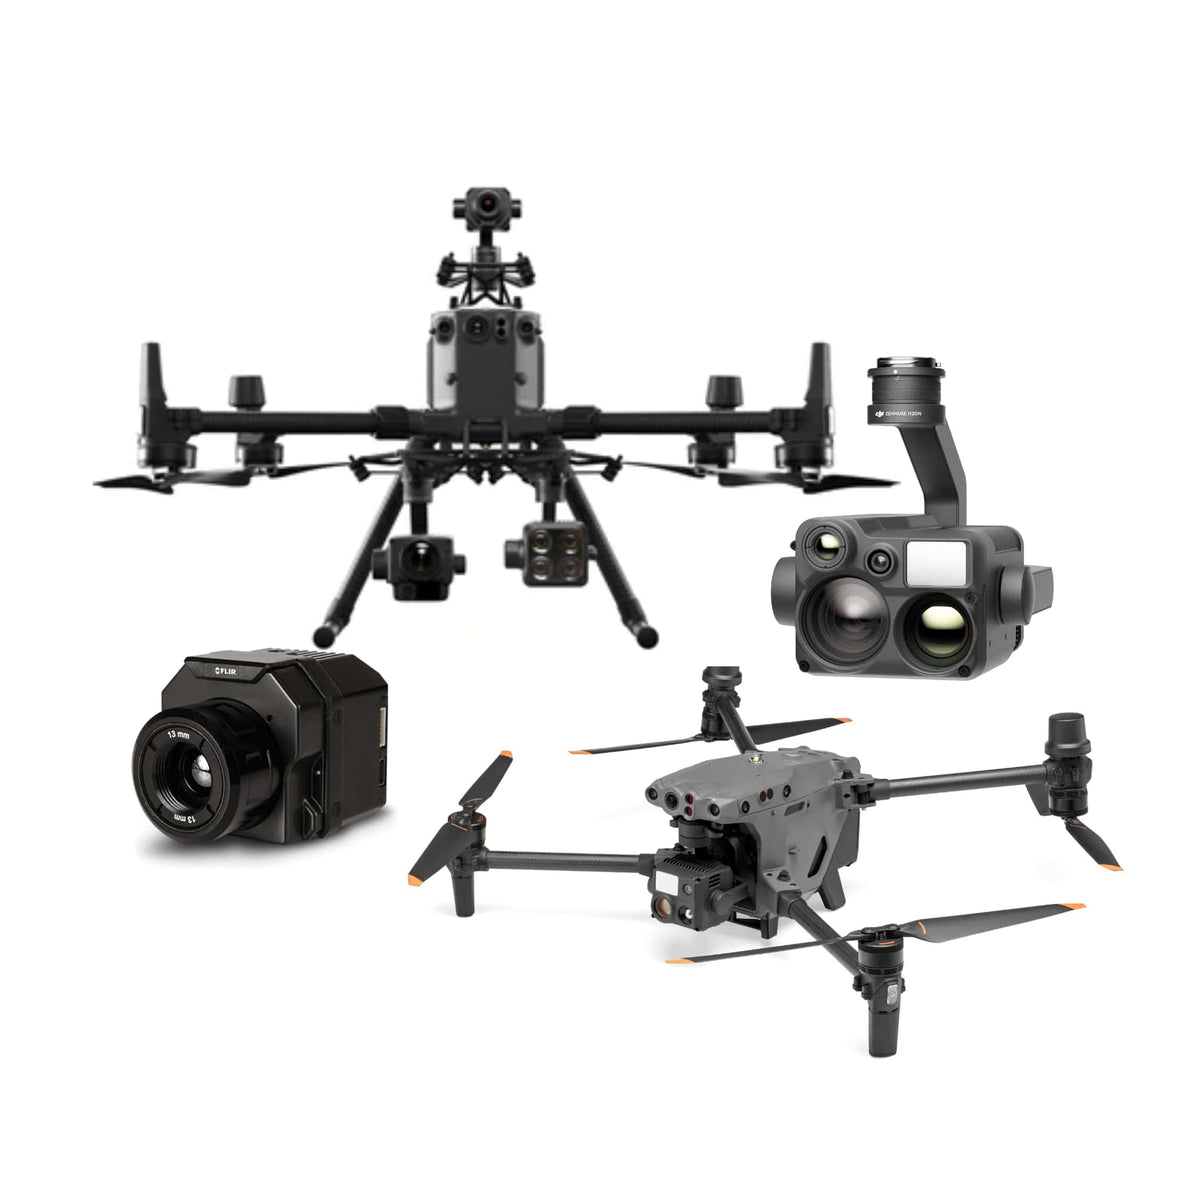 Camera Drones: The Best Drones for Photos and Videos - Drone U™